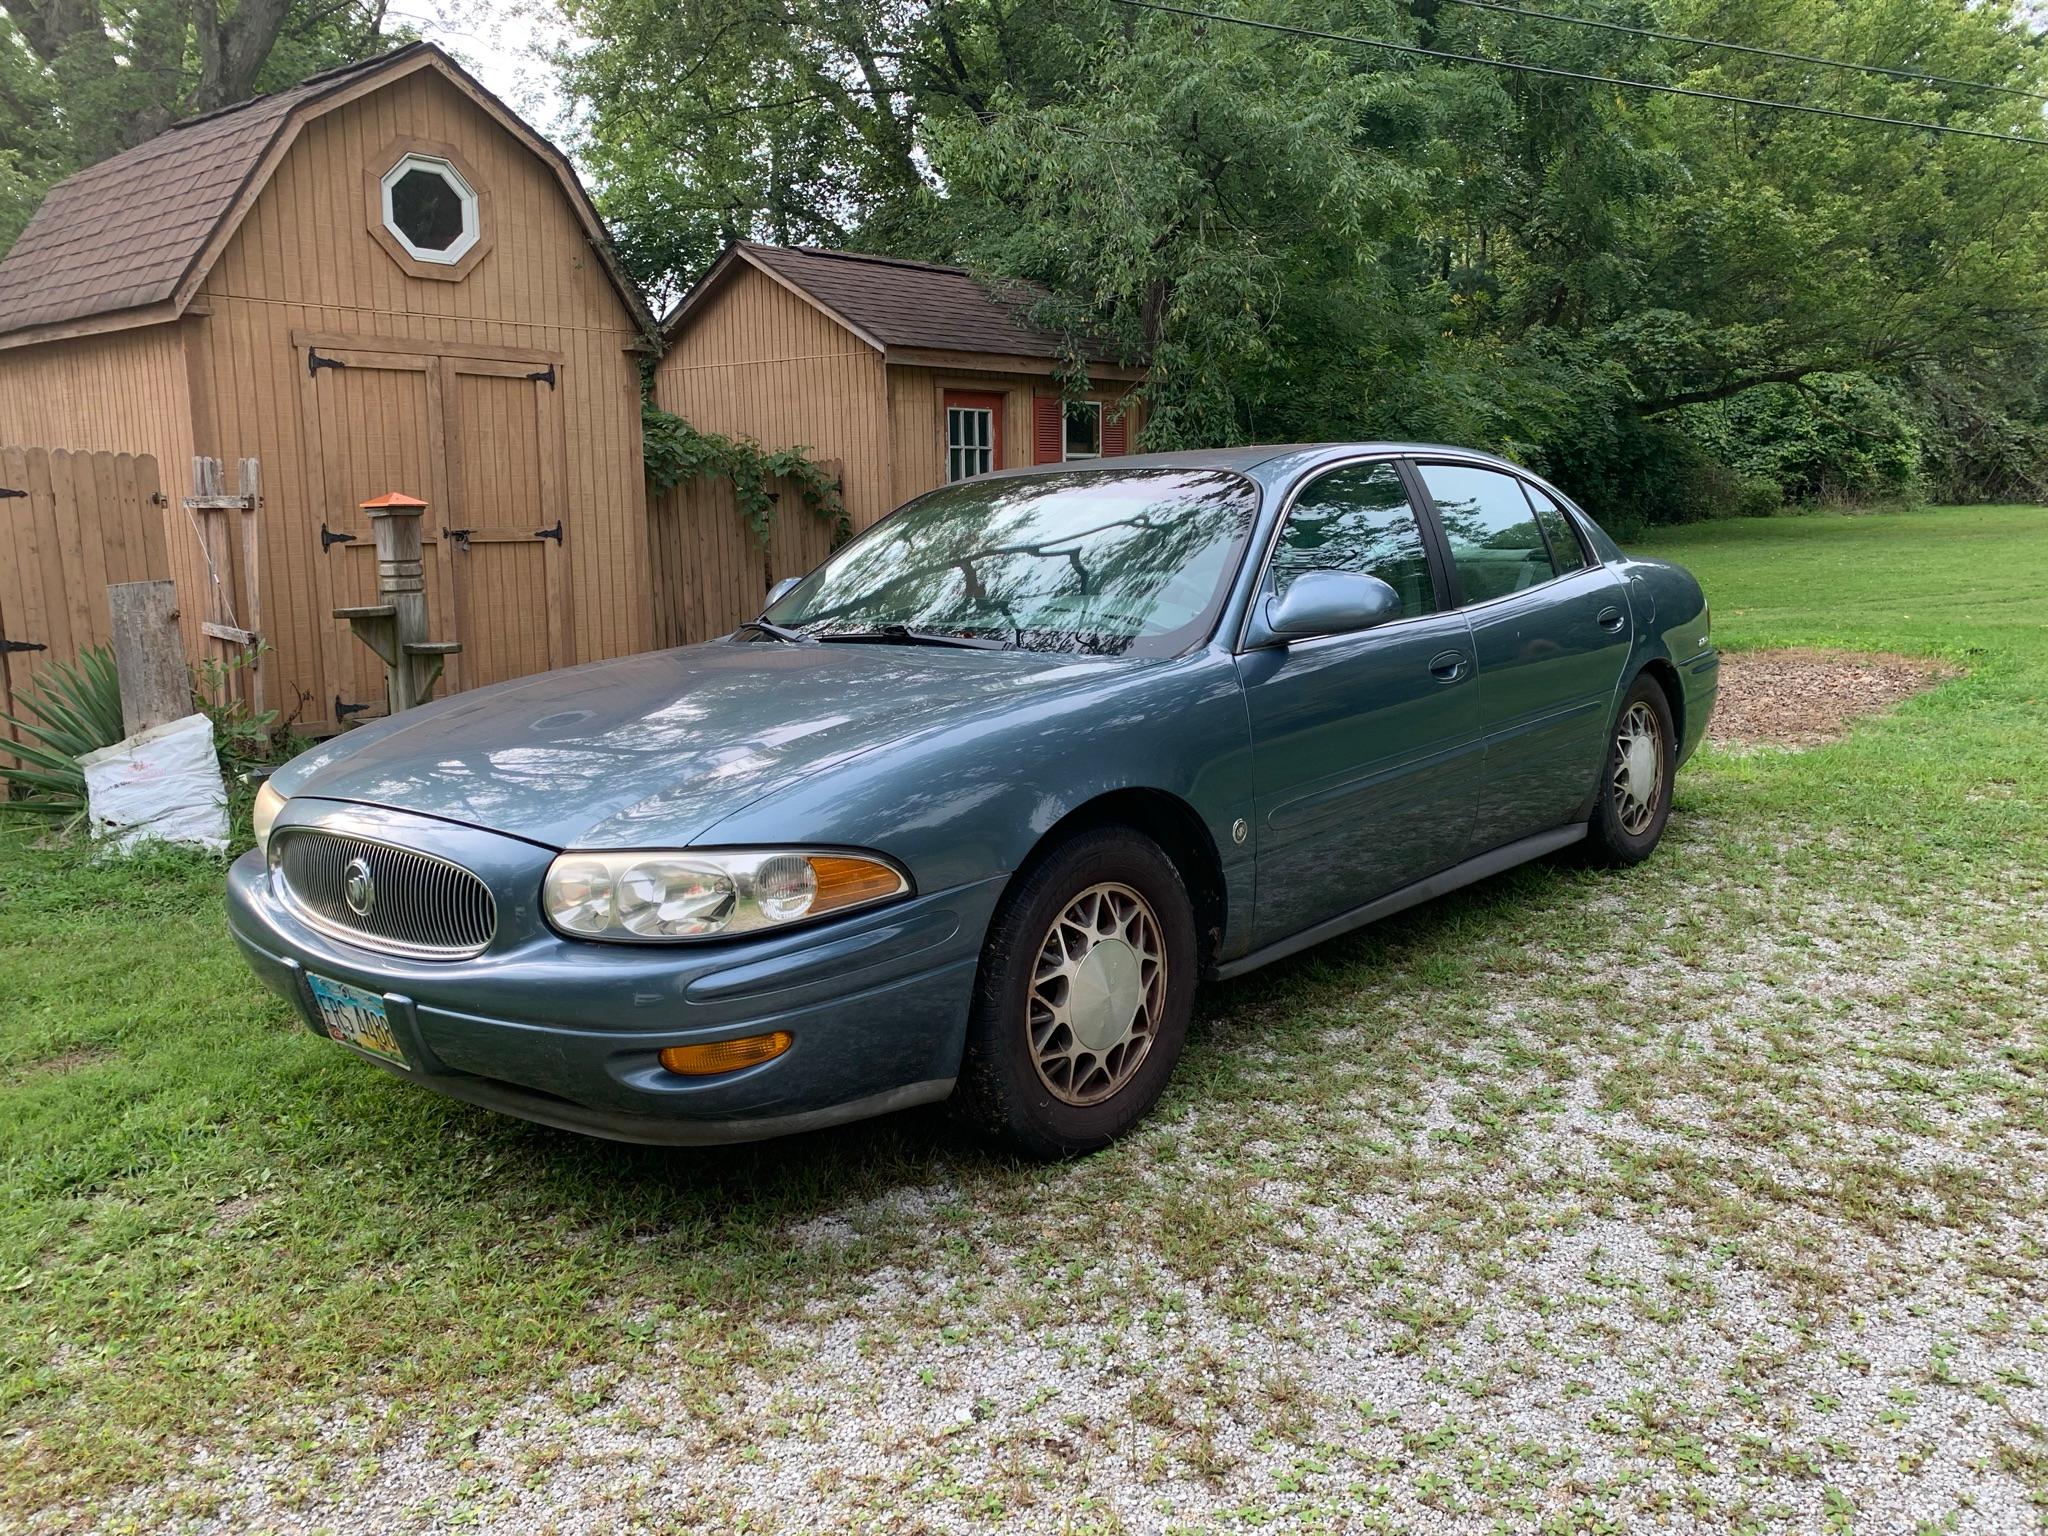 2002 Buick LeSabre Limited with Leather Interior 3800 Series II Motor. 125,178 Miles.  See Photos